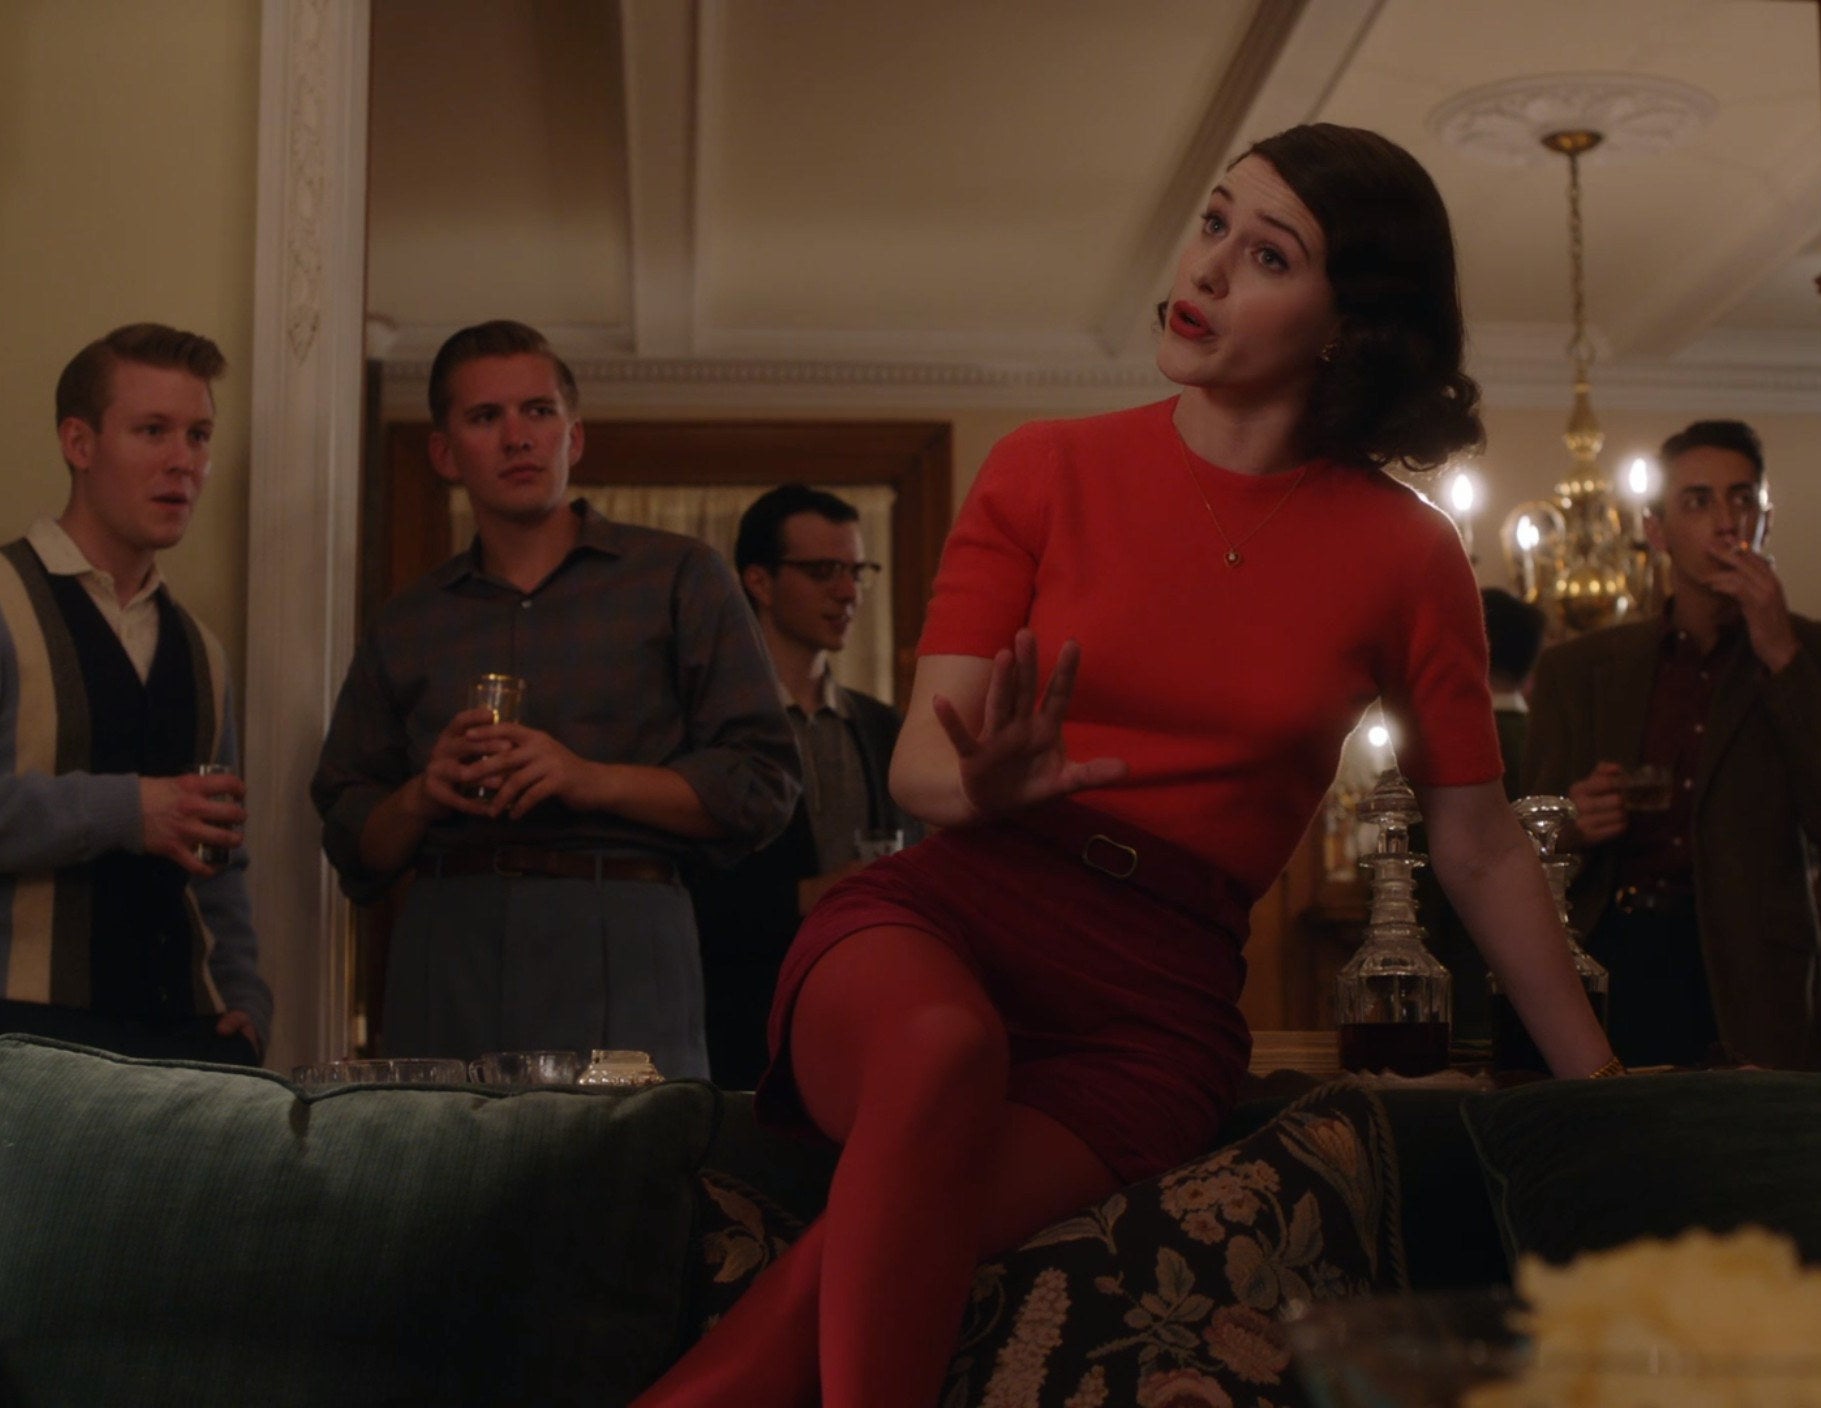 Screenshot from Mrs. Maisel shows Midge in a red outfit sitting on a couch